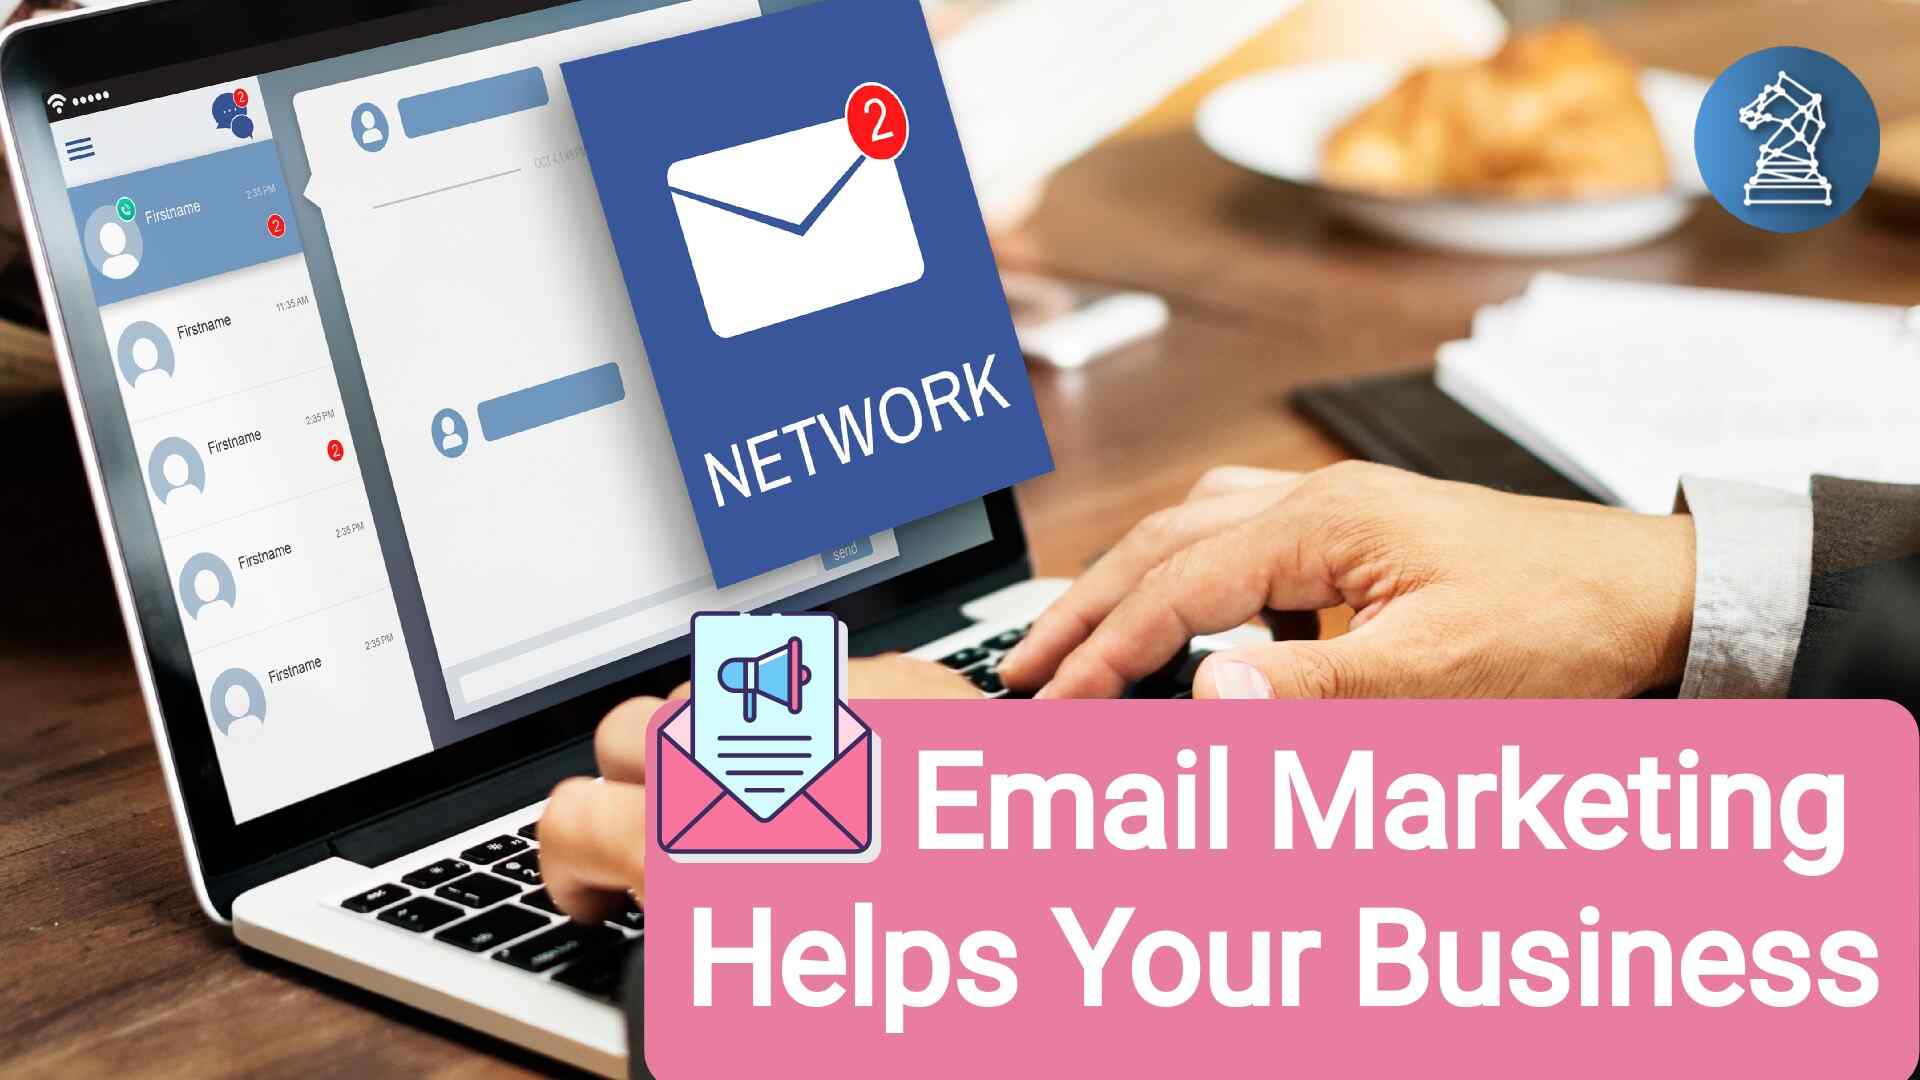 Email Marketing helps Business